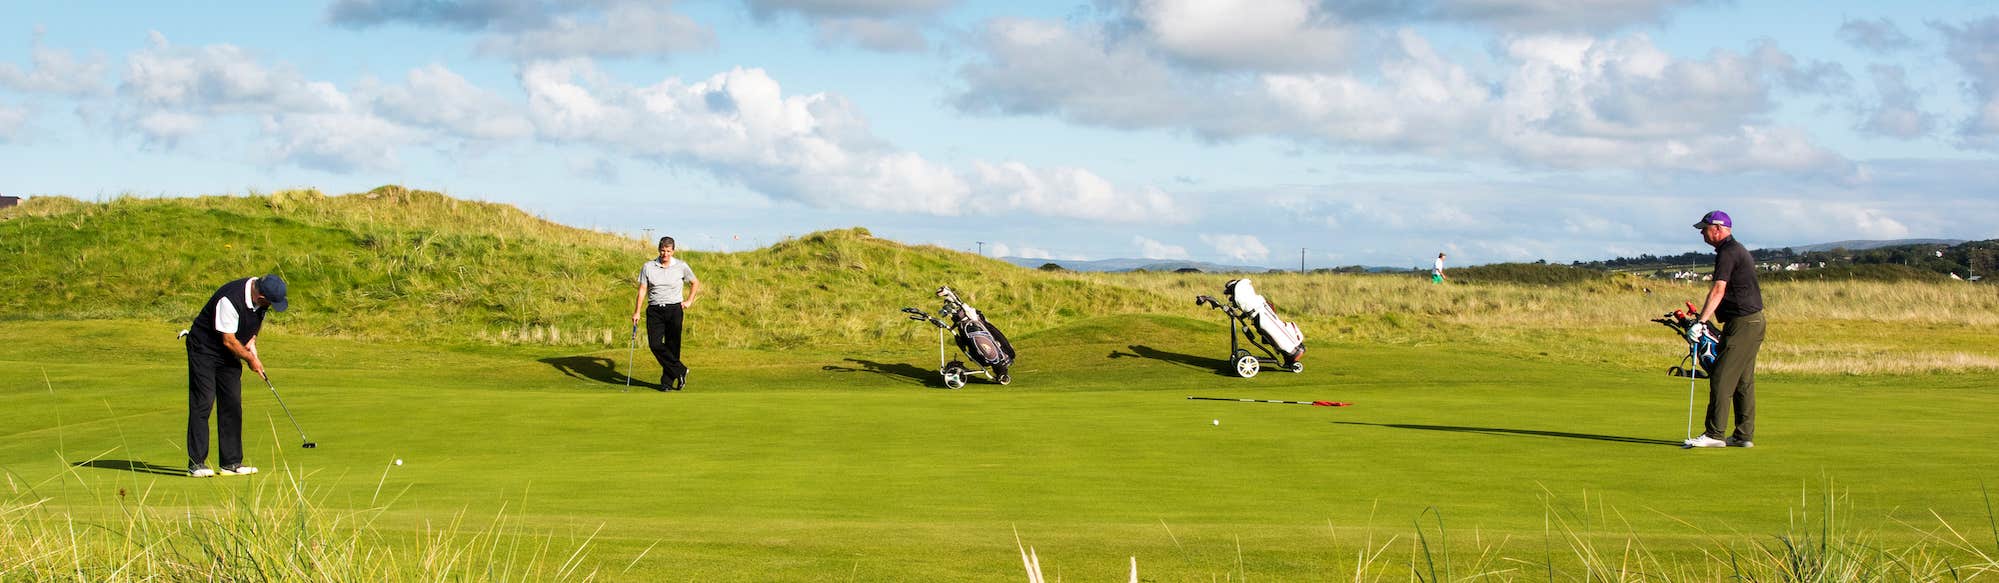 Three golfers at Ballyliffin Golf Course in County Donegal